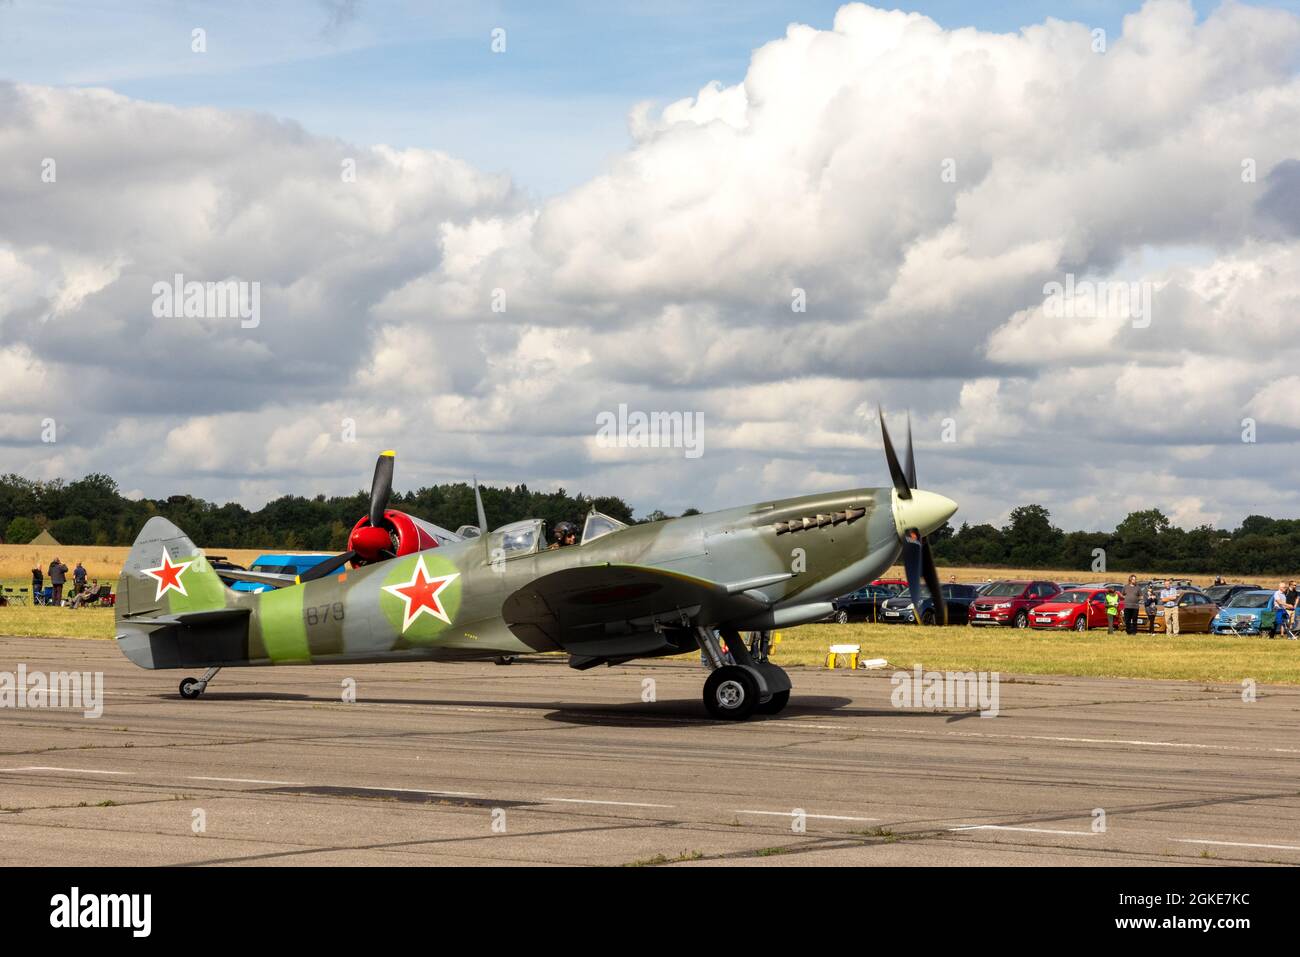 The Russian Spitfire (PT879) taxiing along the runway after arriving at RAF Abingdon to take part in the Abingdon Air & Country Show 2021 Stock Photo